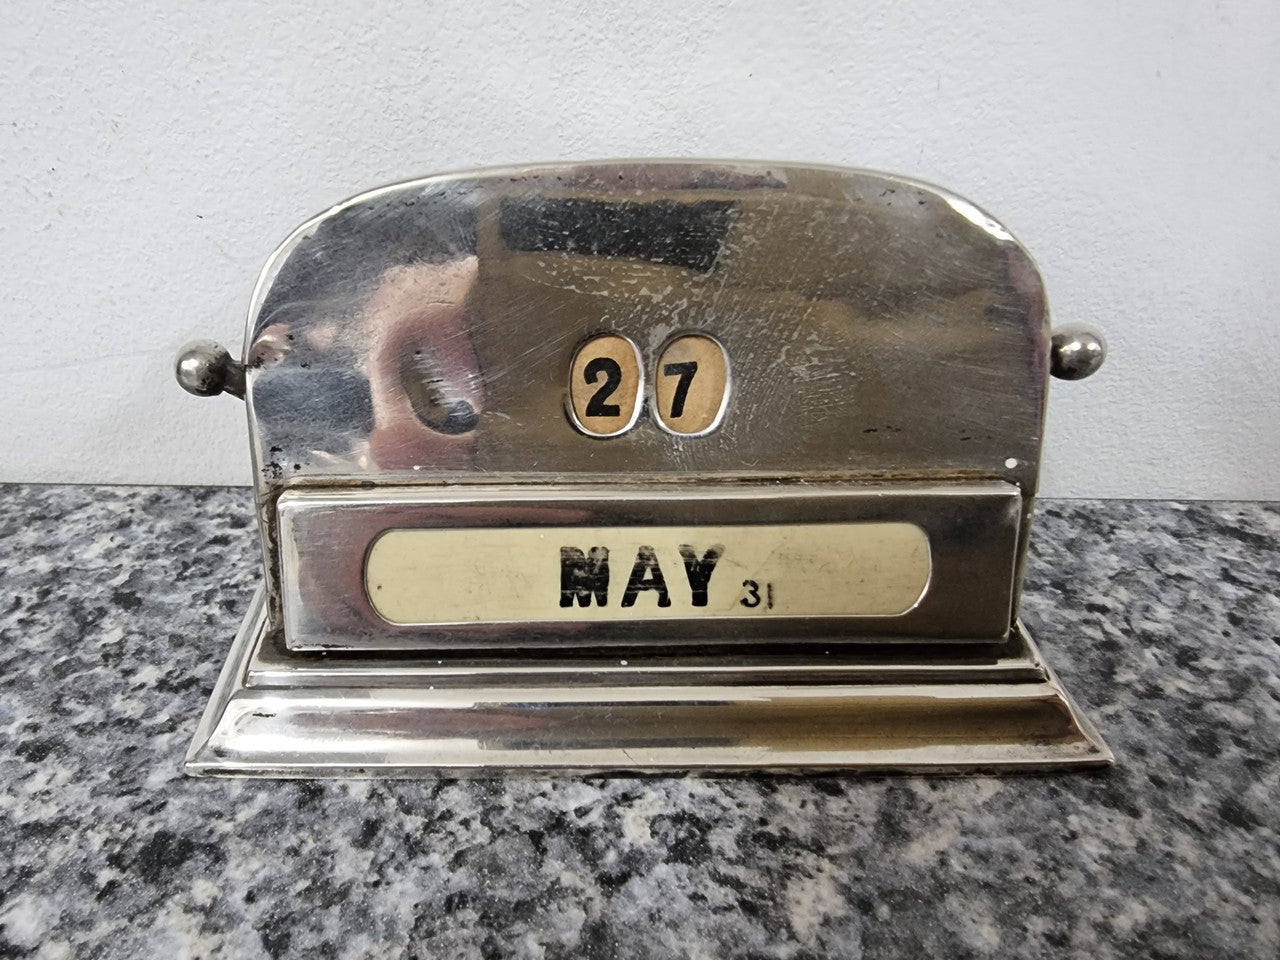 Art Deco Sterling Silver Birmingham working calendar. In good condition please view photos as they help form part of the description.

Australia Wide Delivery

We can arrange delivery to Melbourne, Hobart, Launceston, Sydney, Adelaide, Perth, Canberra, Brisbane, and regional centres.